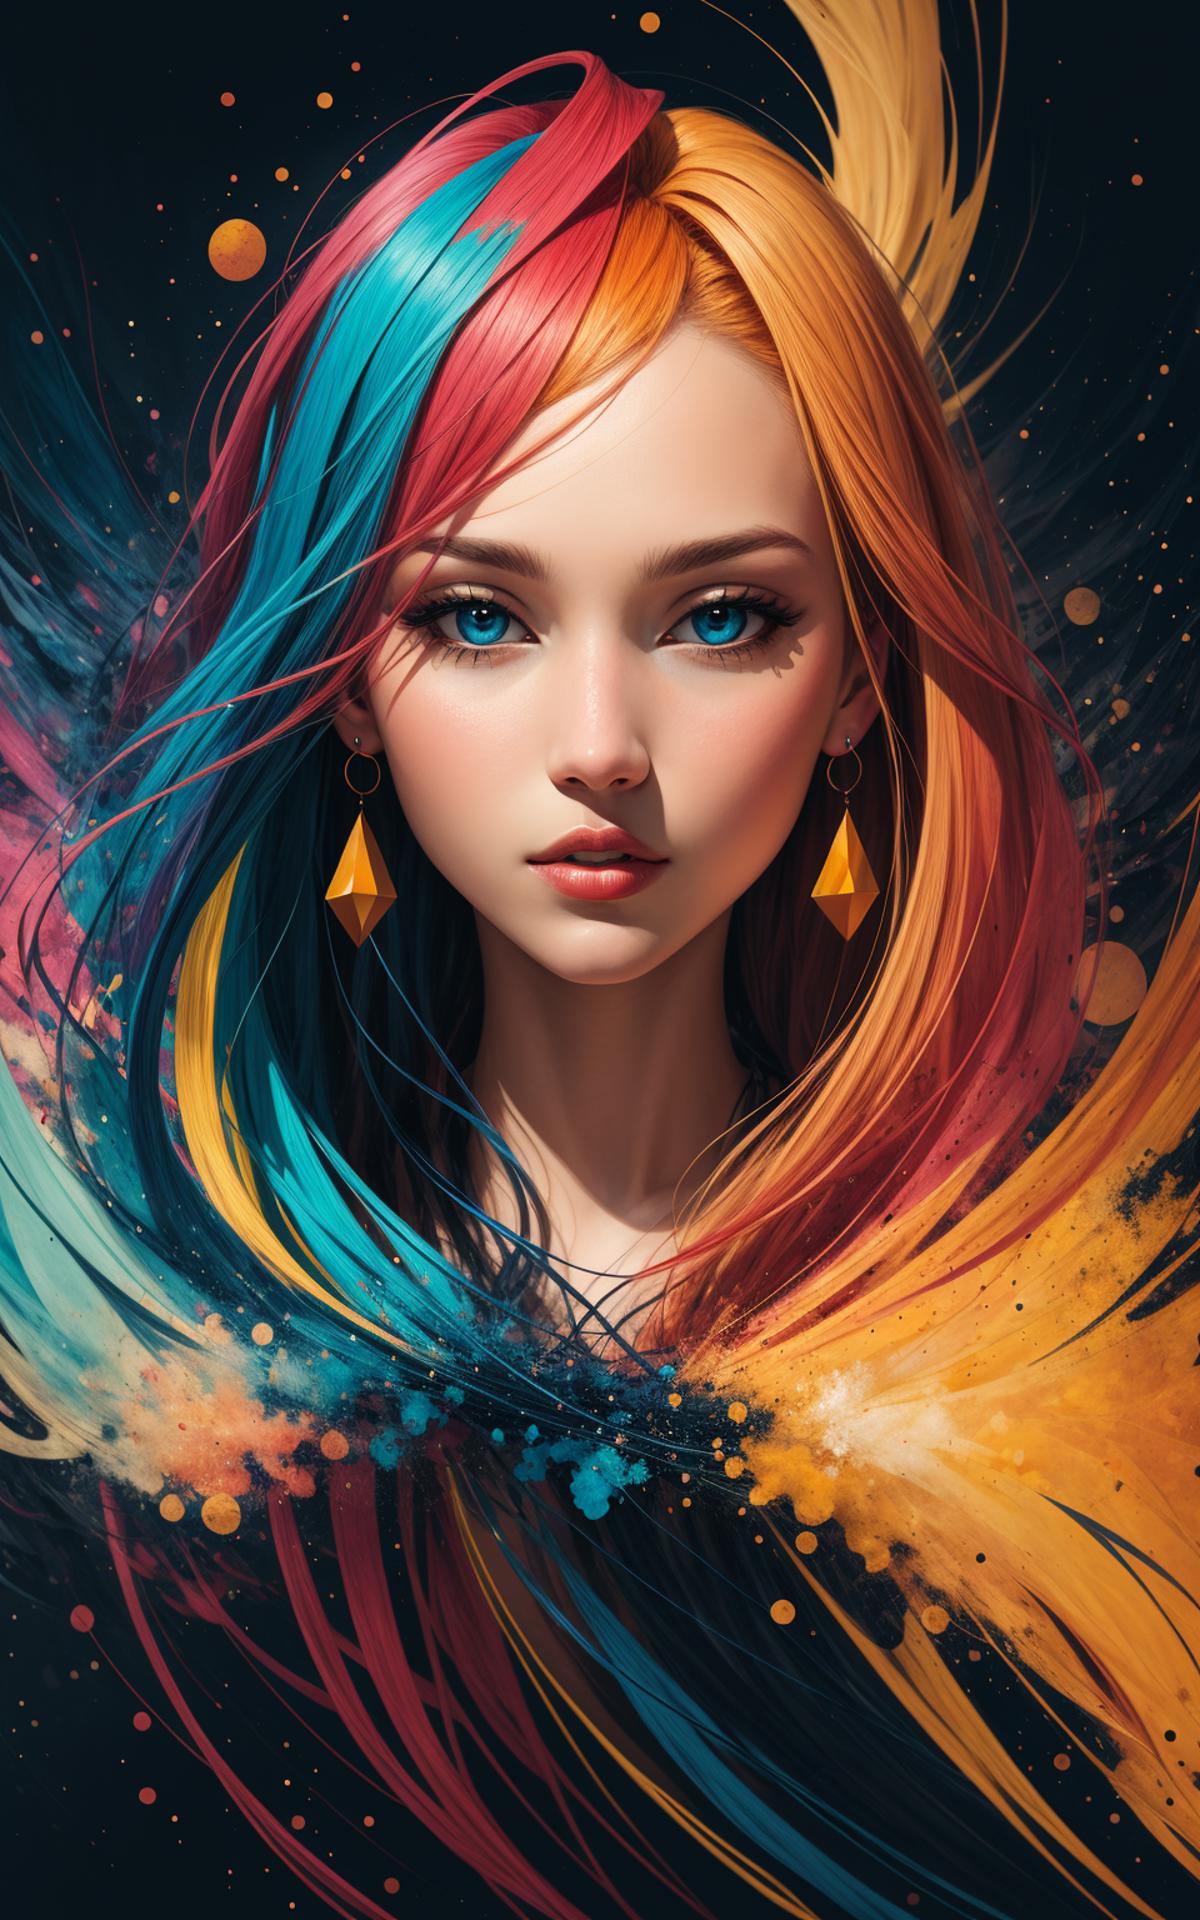 A painting of a young woman with blue eyes and colorful hair.